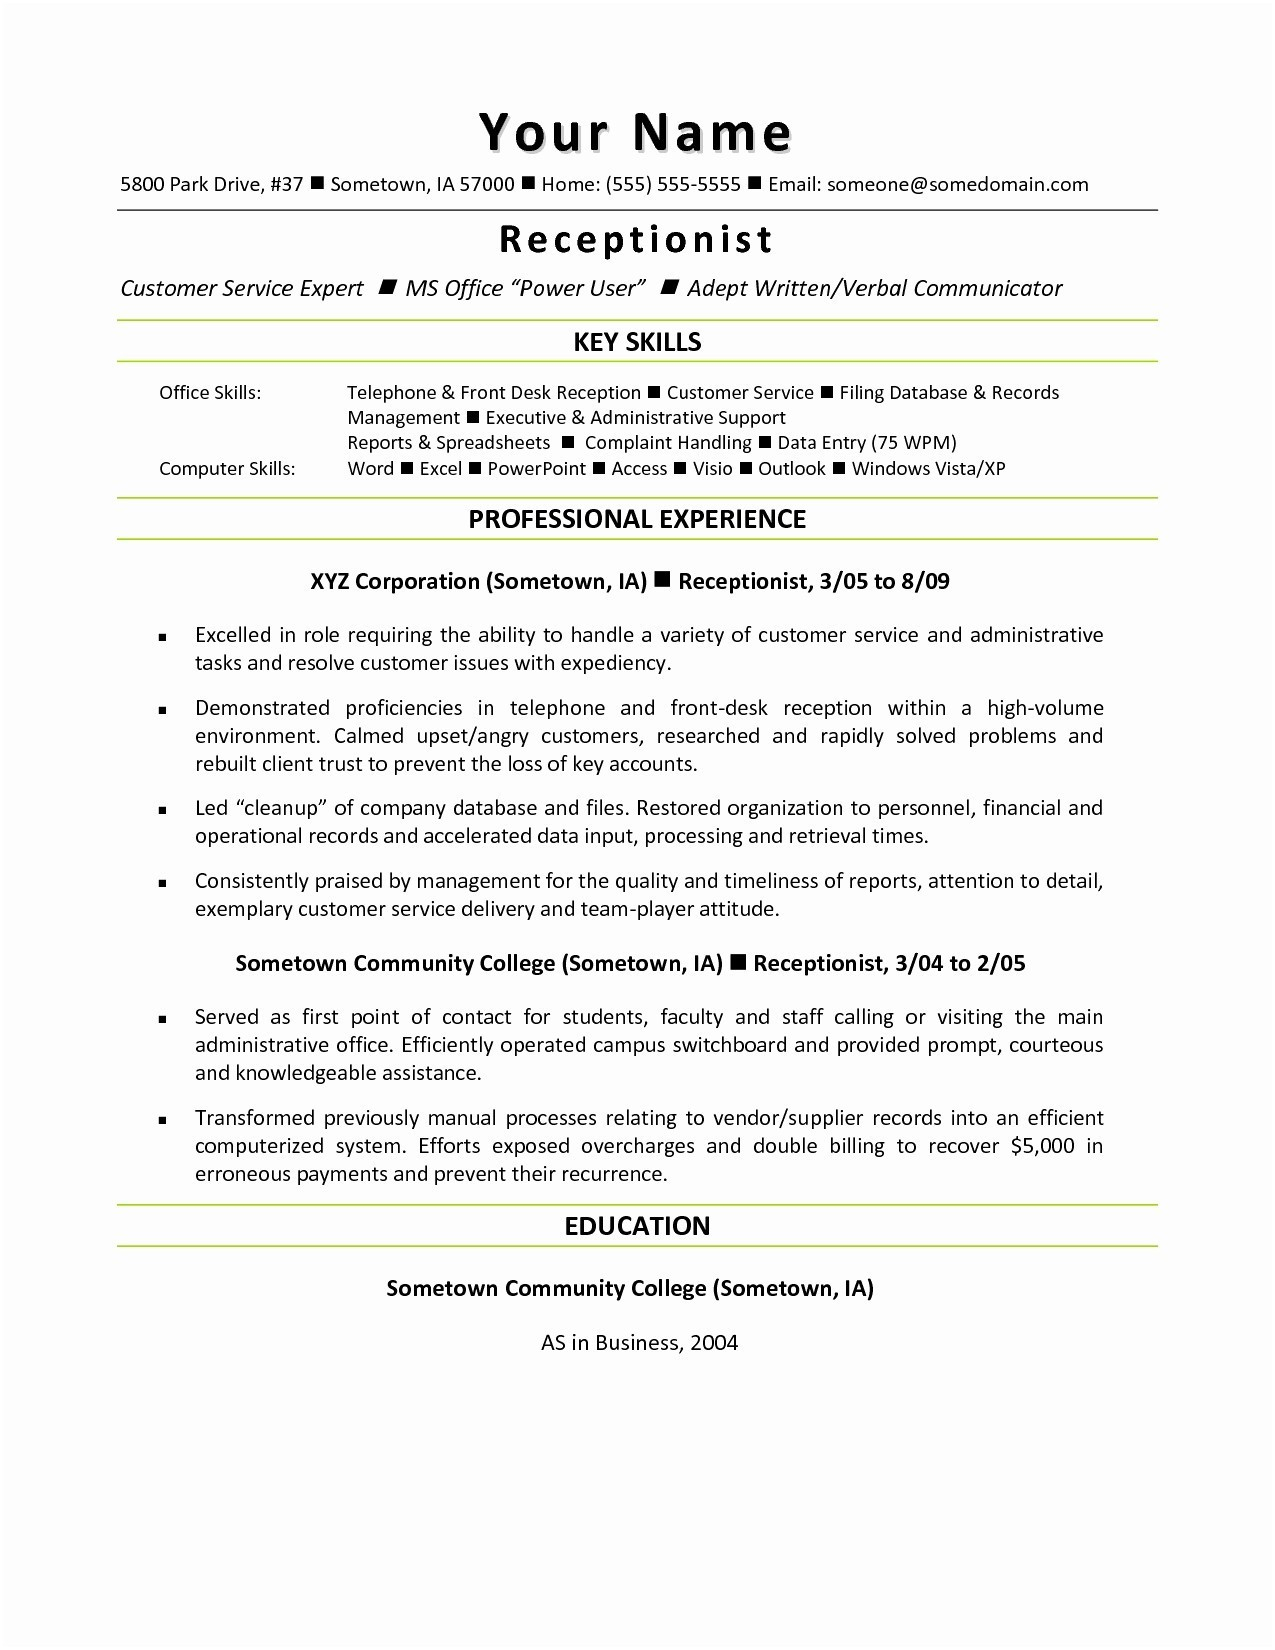 Cover Letter Template Microsoft Word 2010 - Resume Microsoft Word Fresh Resume Mail format Sample Fresh